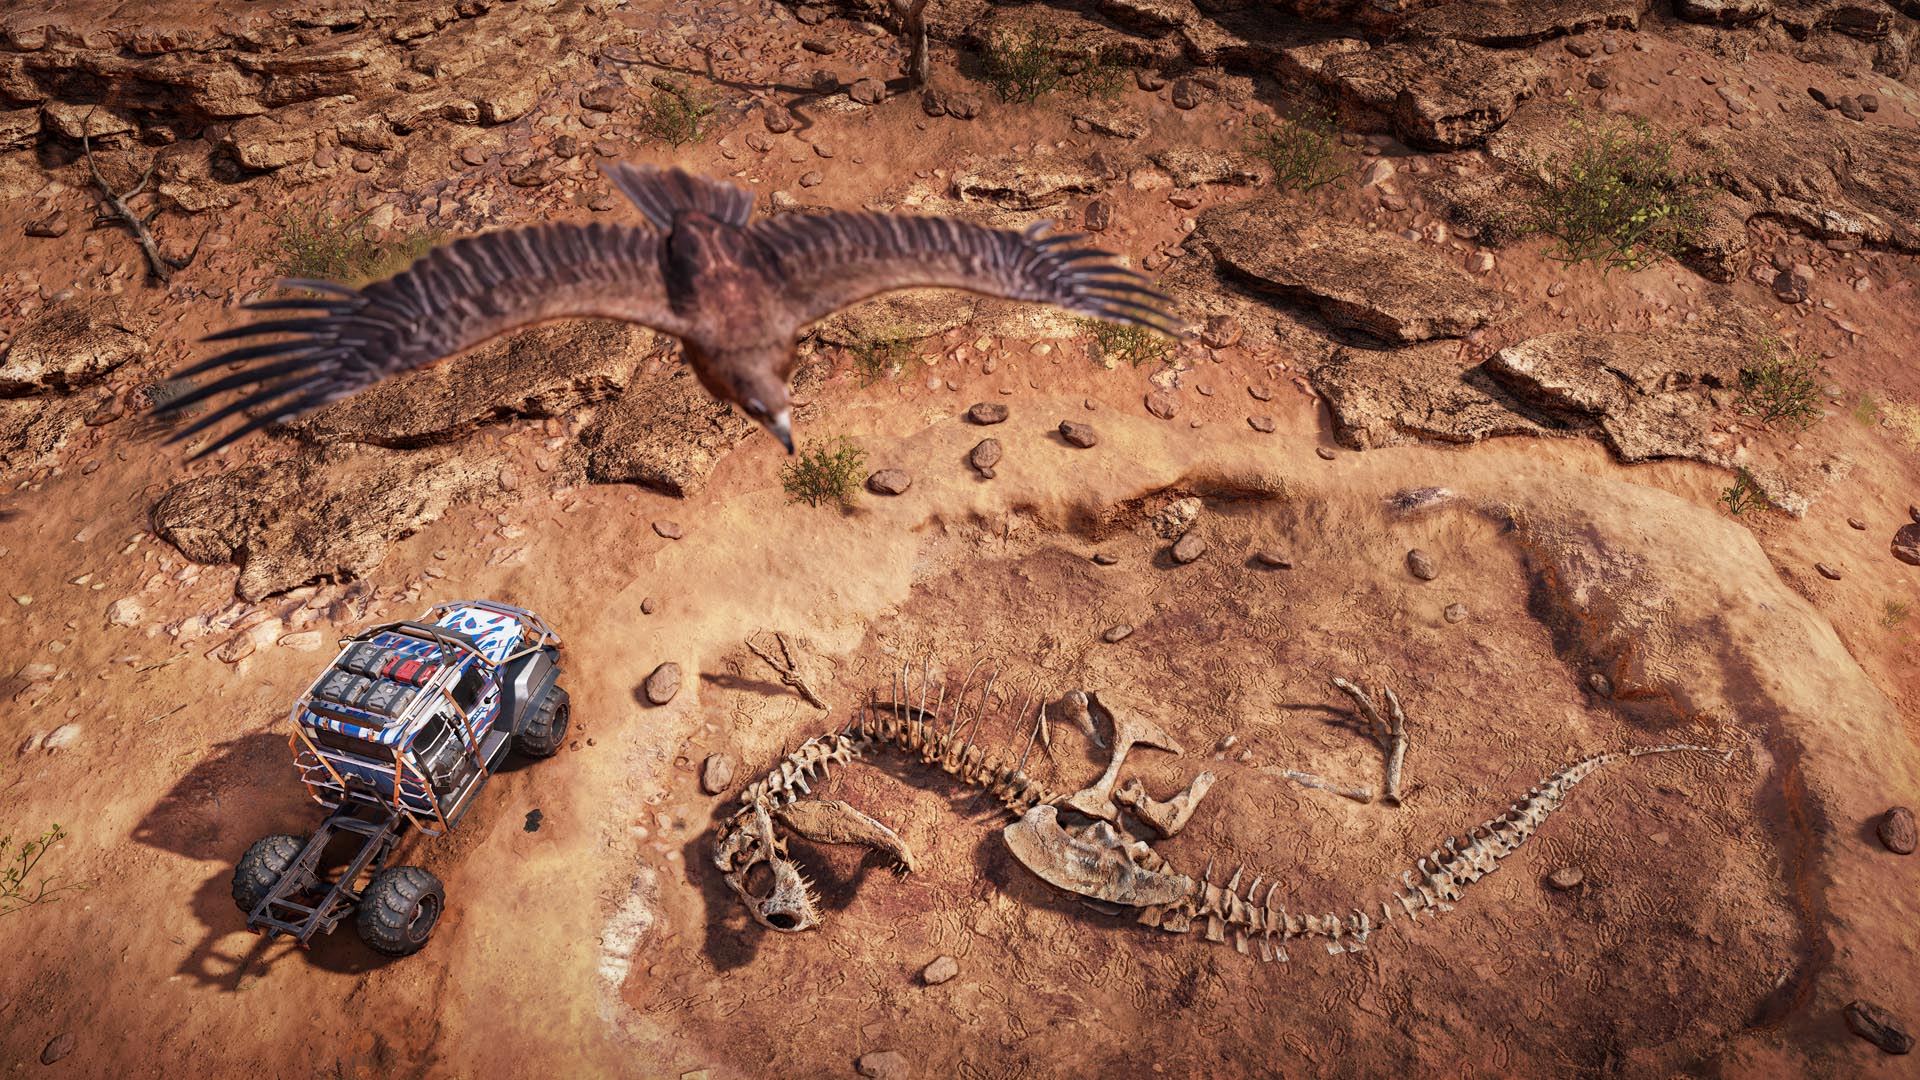 Expeditions: A screenshot of the Mudrunner game